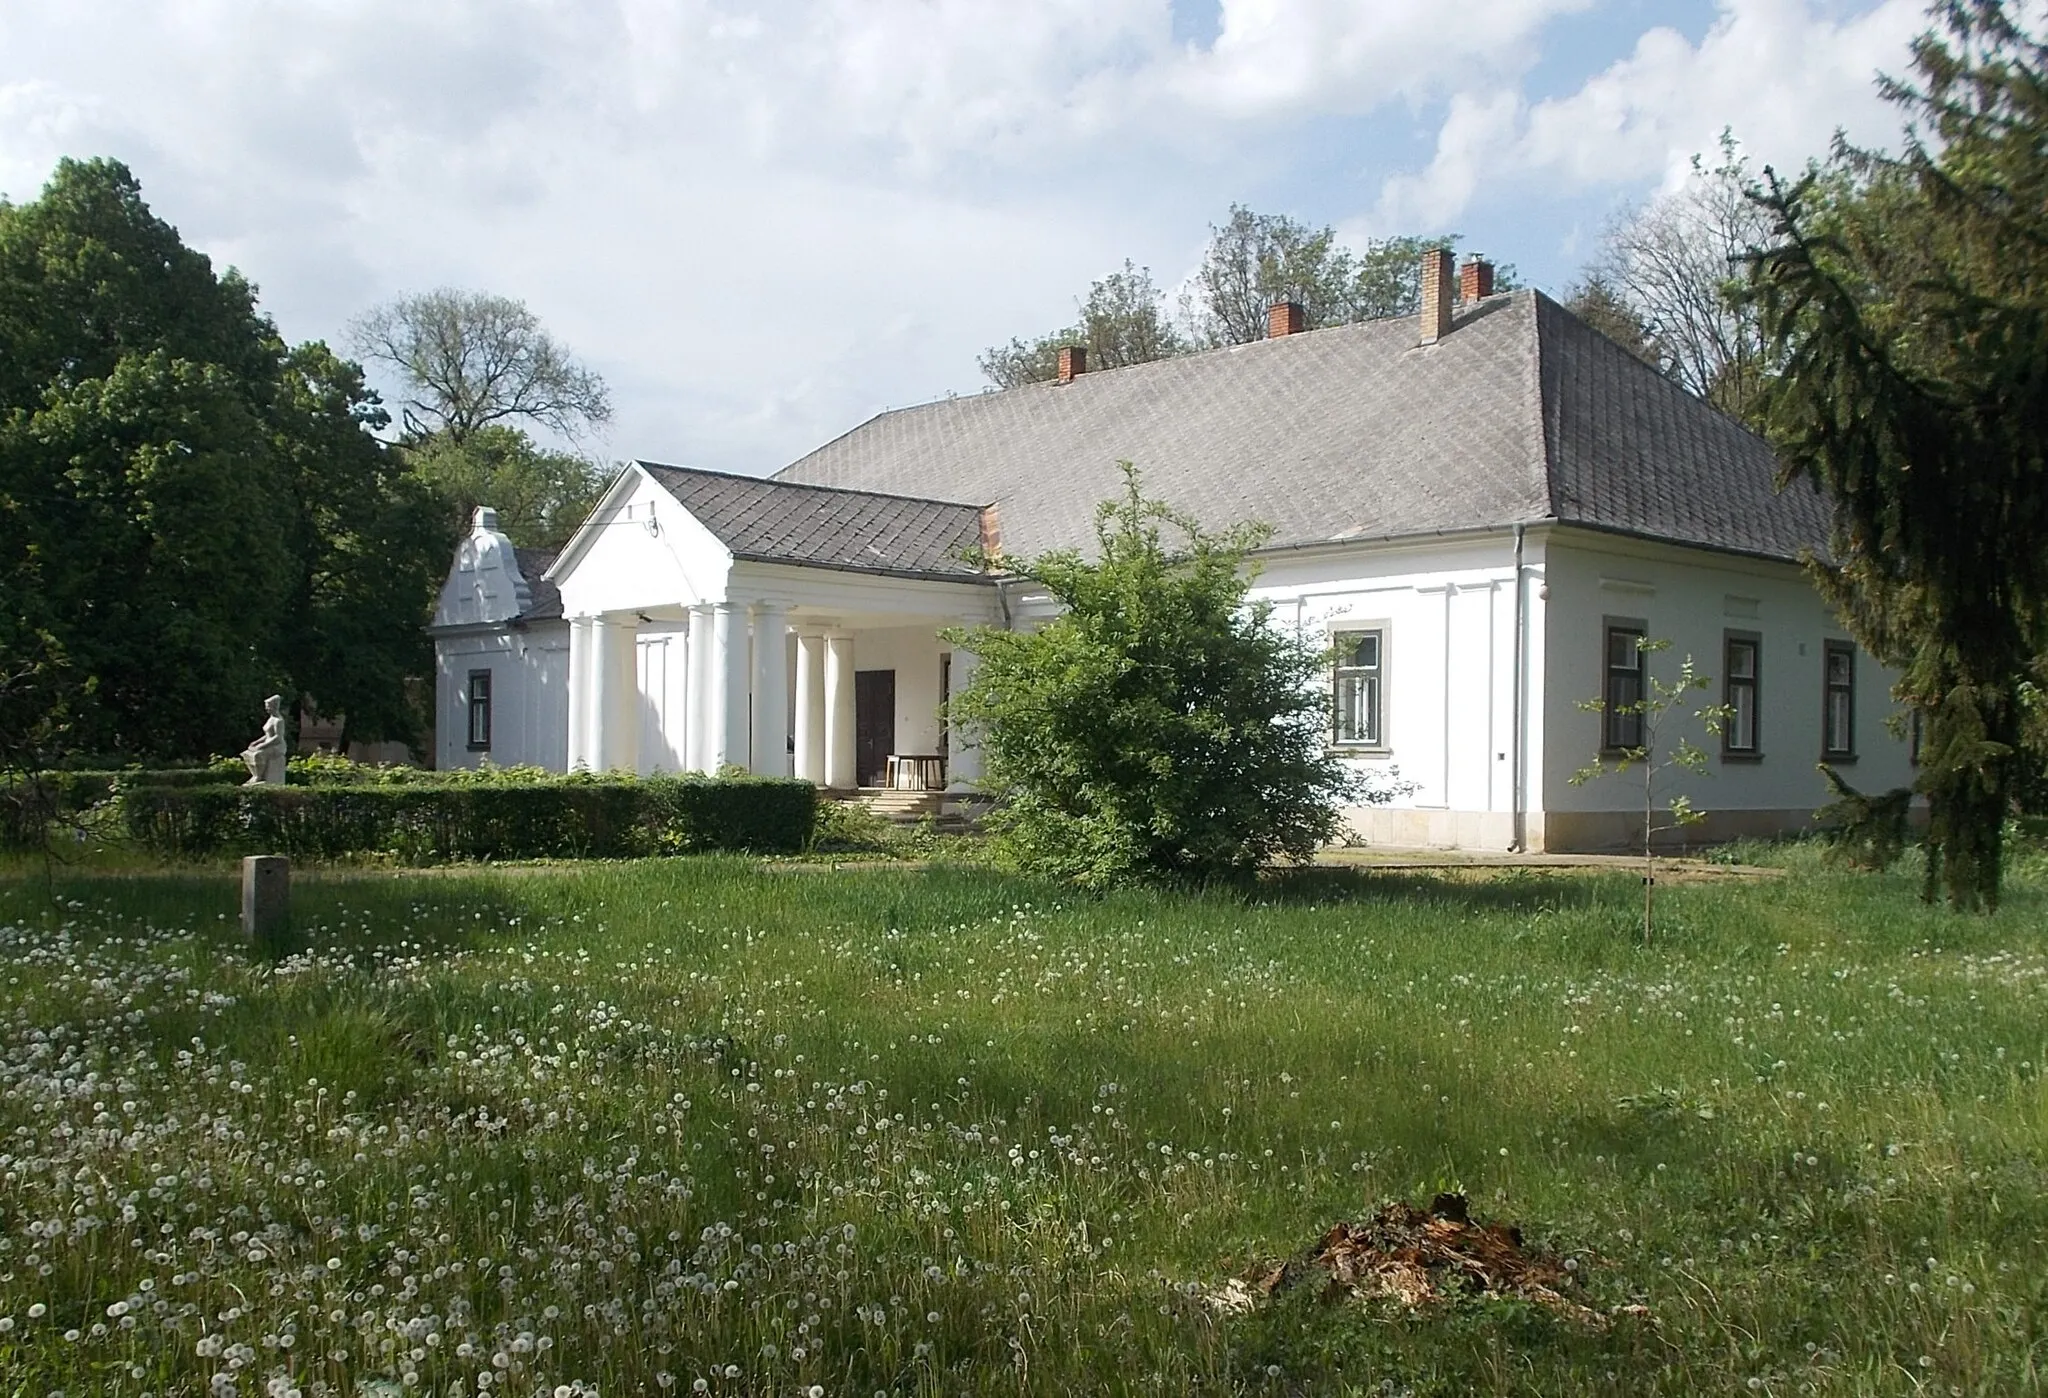 Photo showing: : Dobóczky mansion (1910s?, listed) at the former State Farm Vocational School plot - 29 Dobó István utca (Route 3209), Heves, Heves County, Hungary.